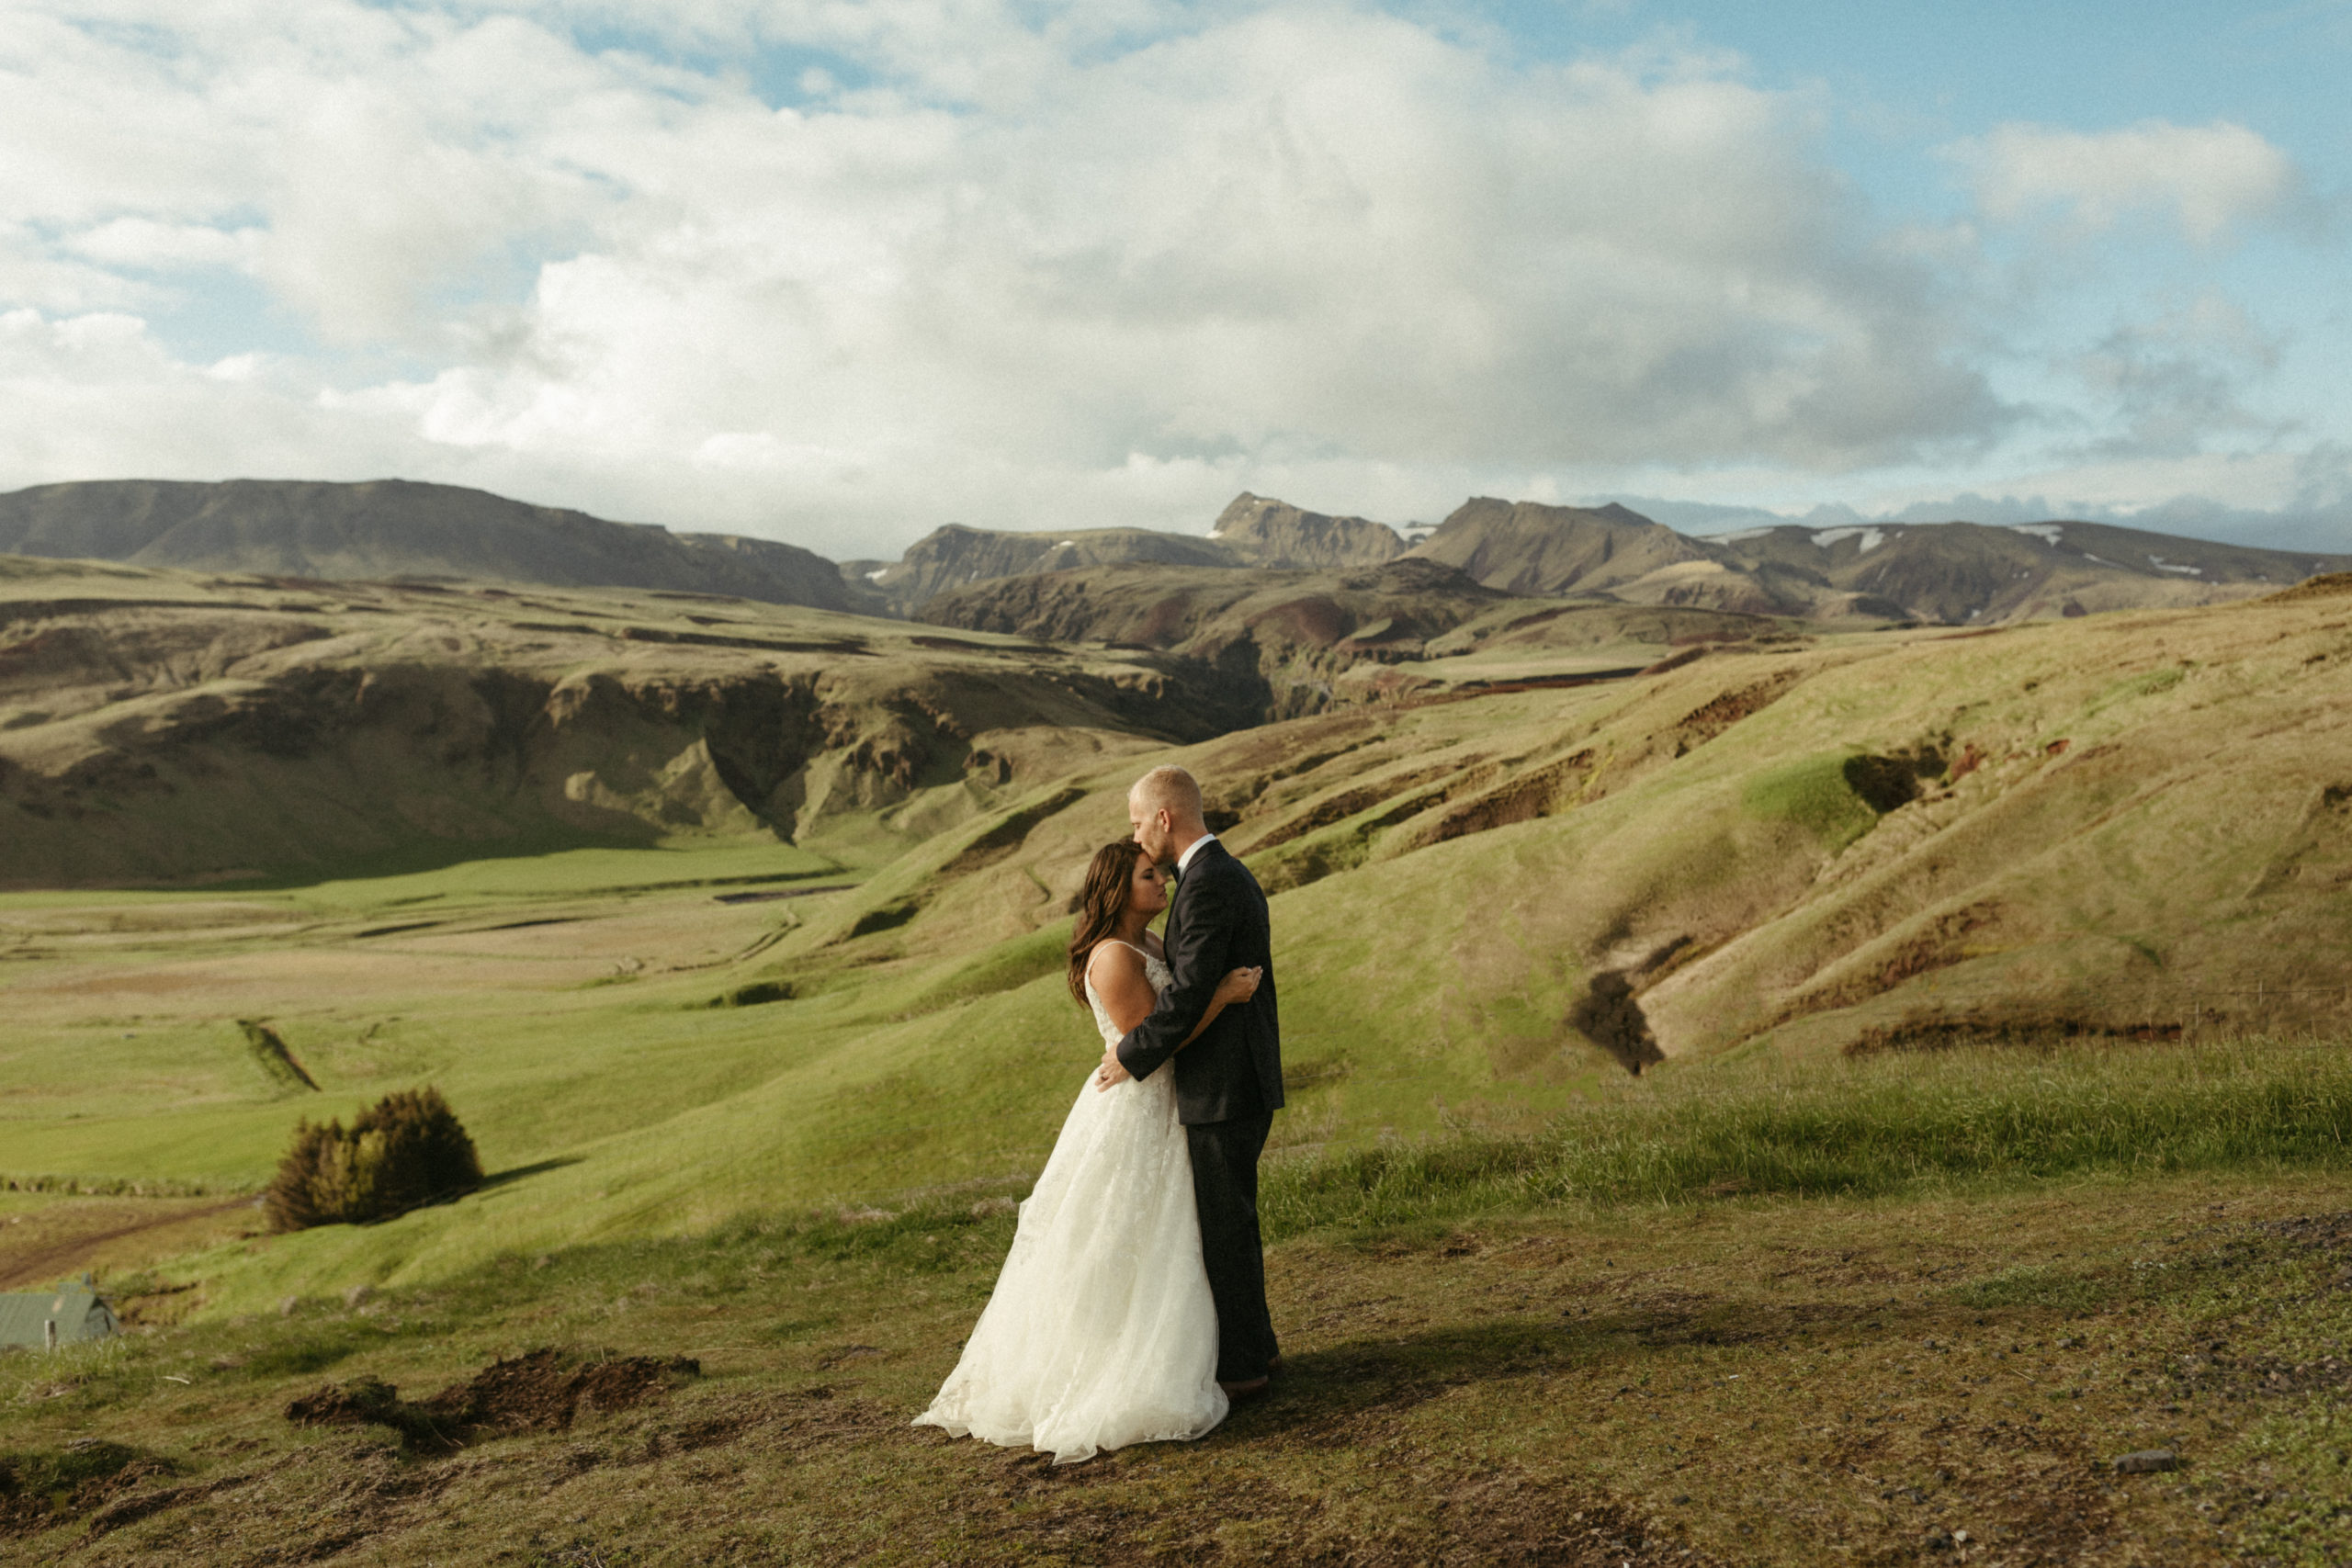 Bride and groom in iceland with mountains and green valleys behind them. 